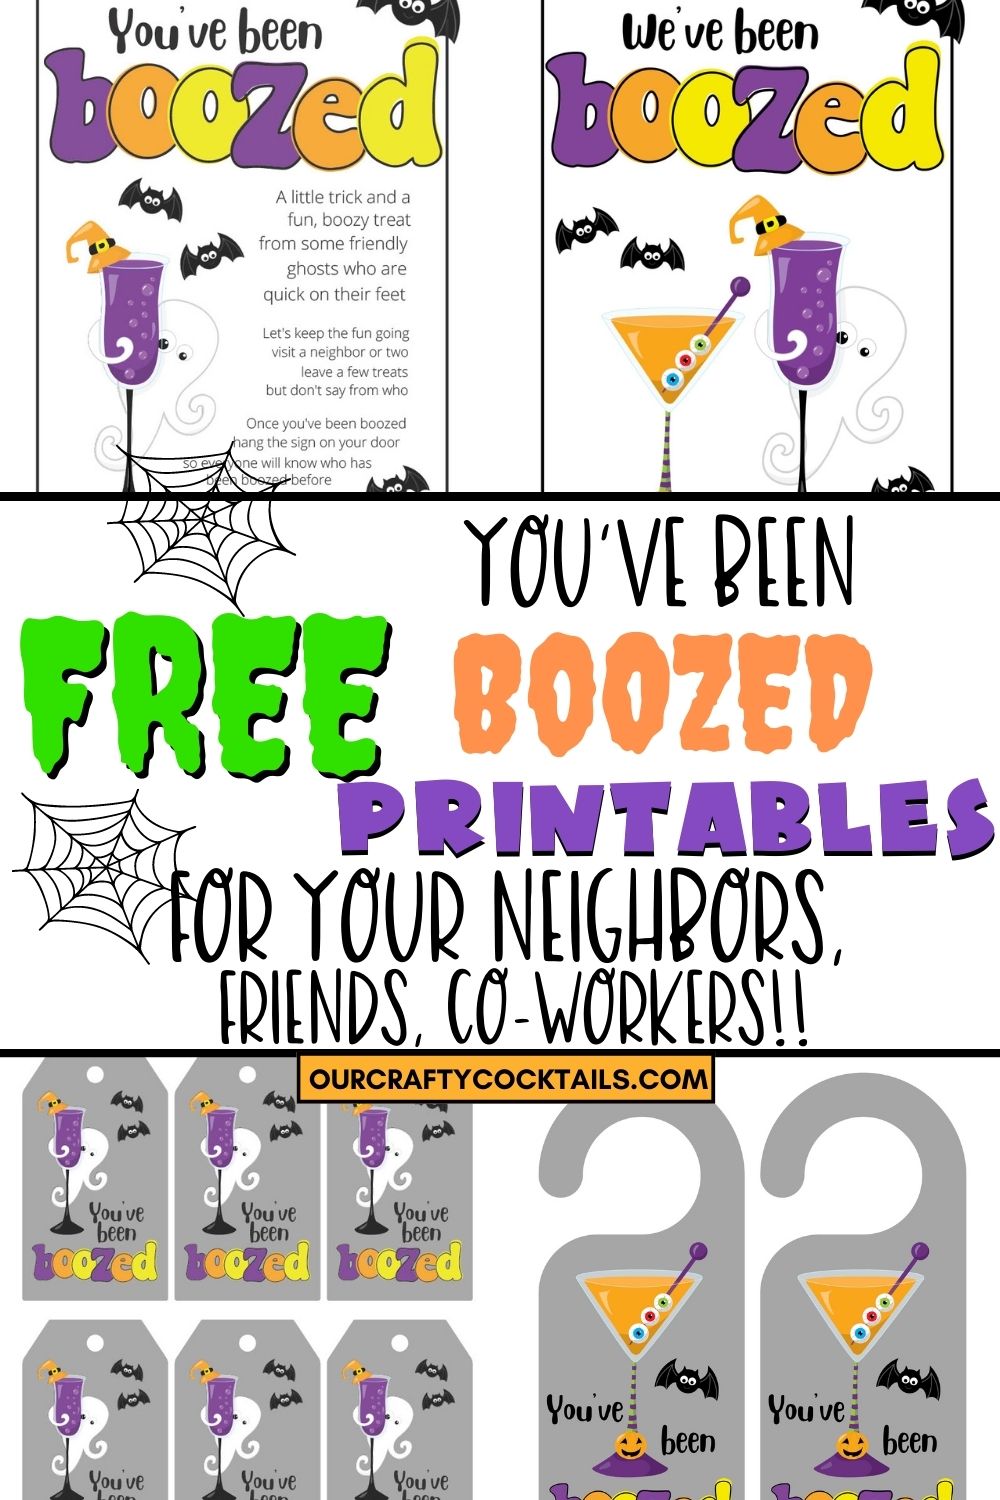 youve been boozed printables with text